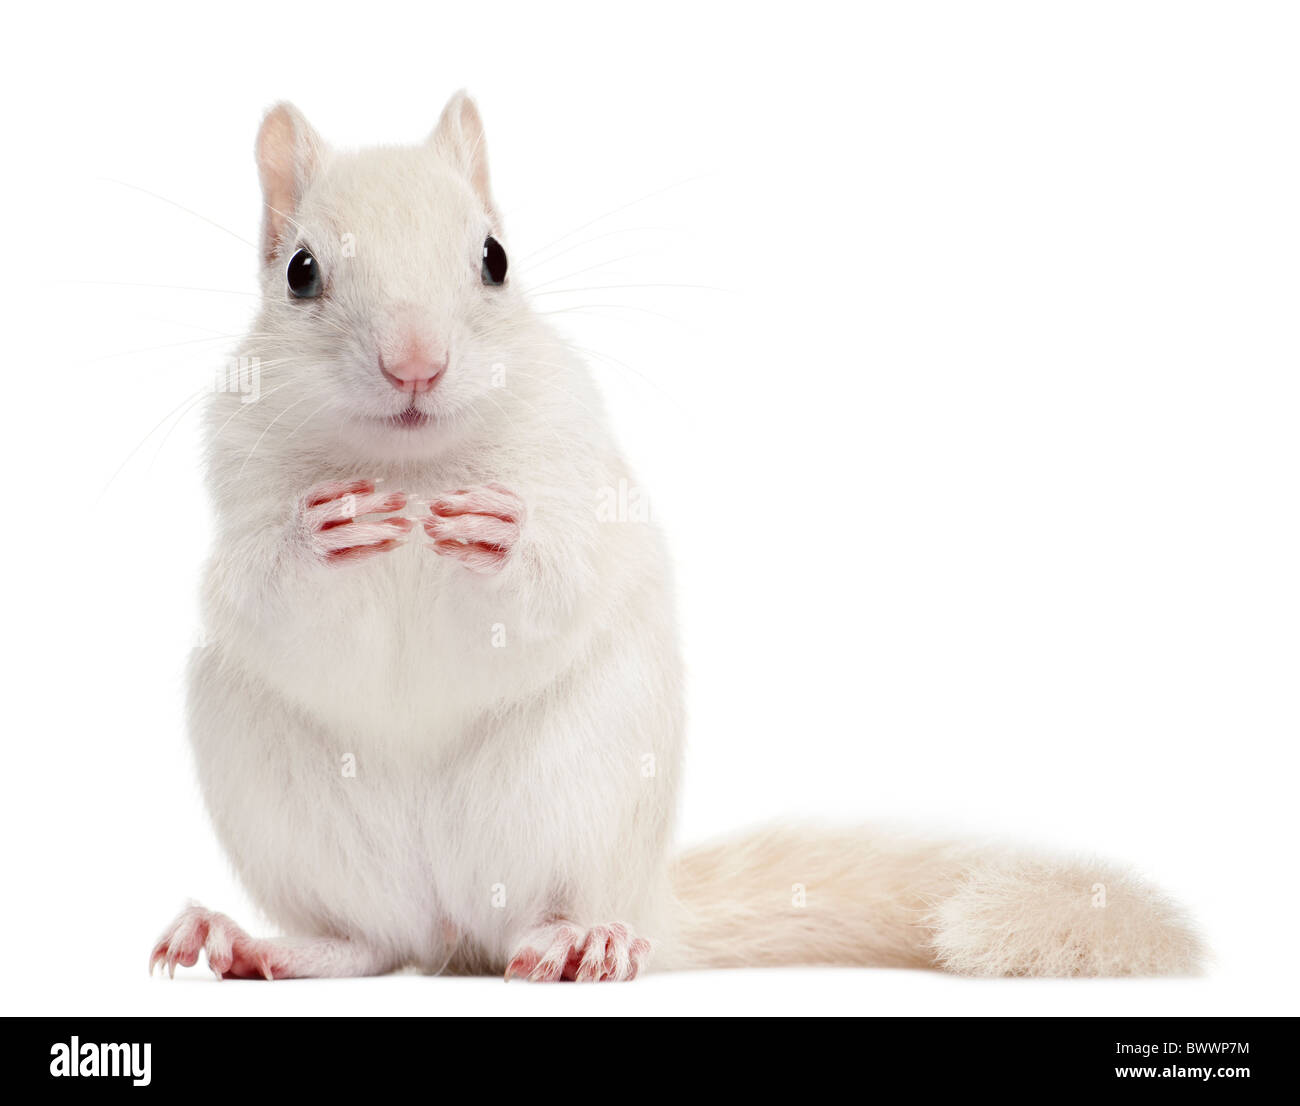 Eastern Chipmunk, Tamias striatus, 2 years old, in front of white background Stock Photo